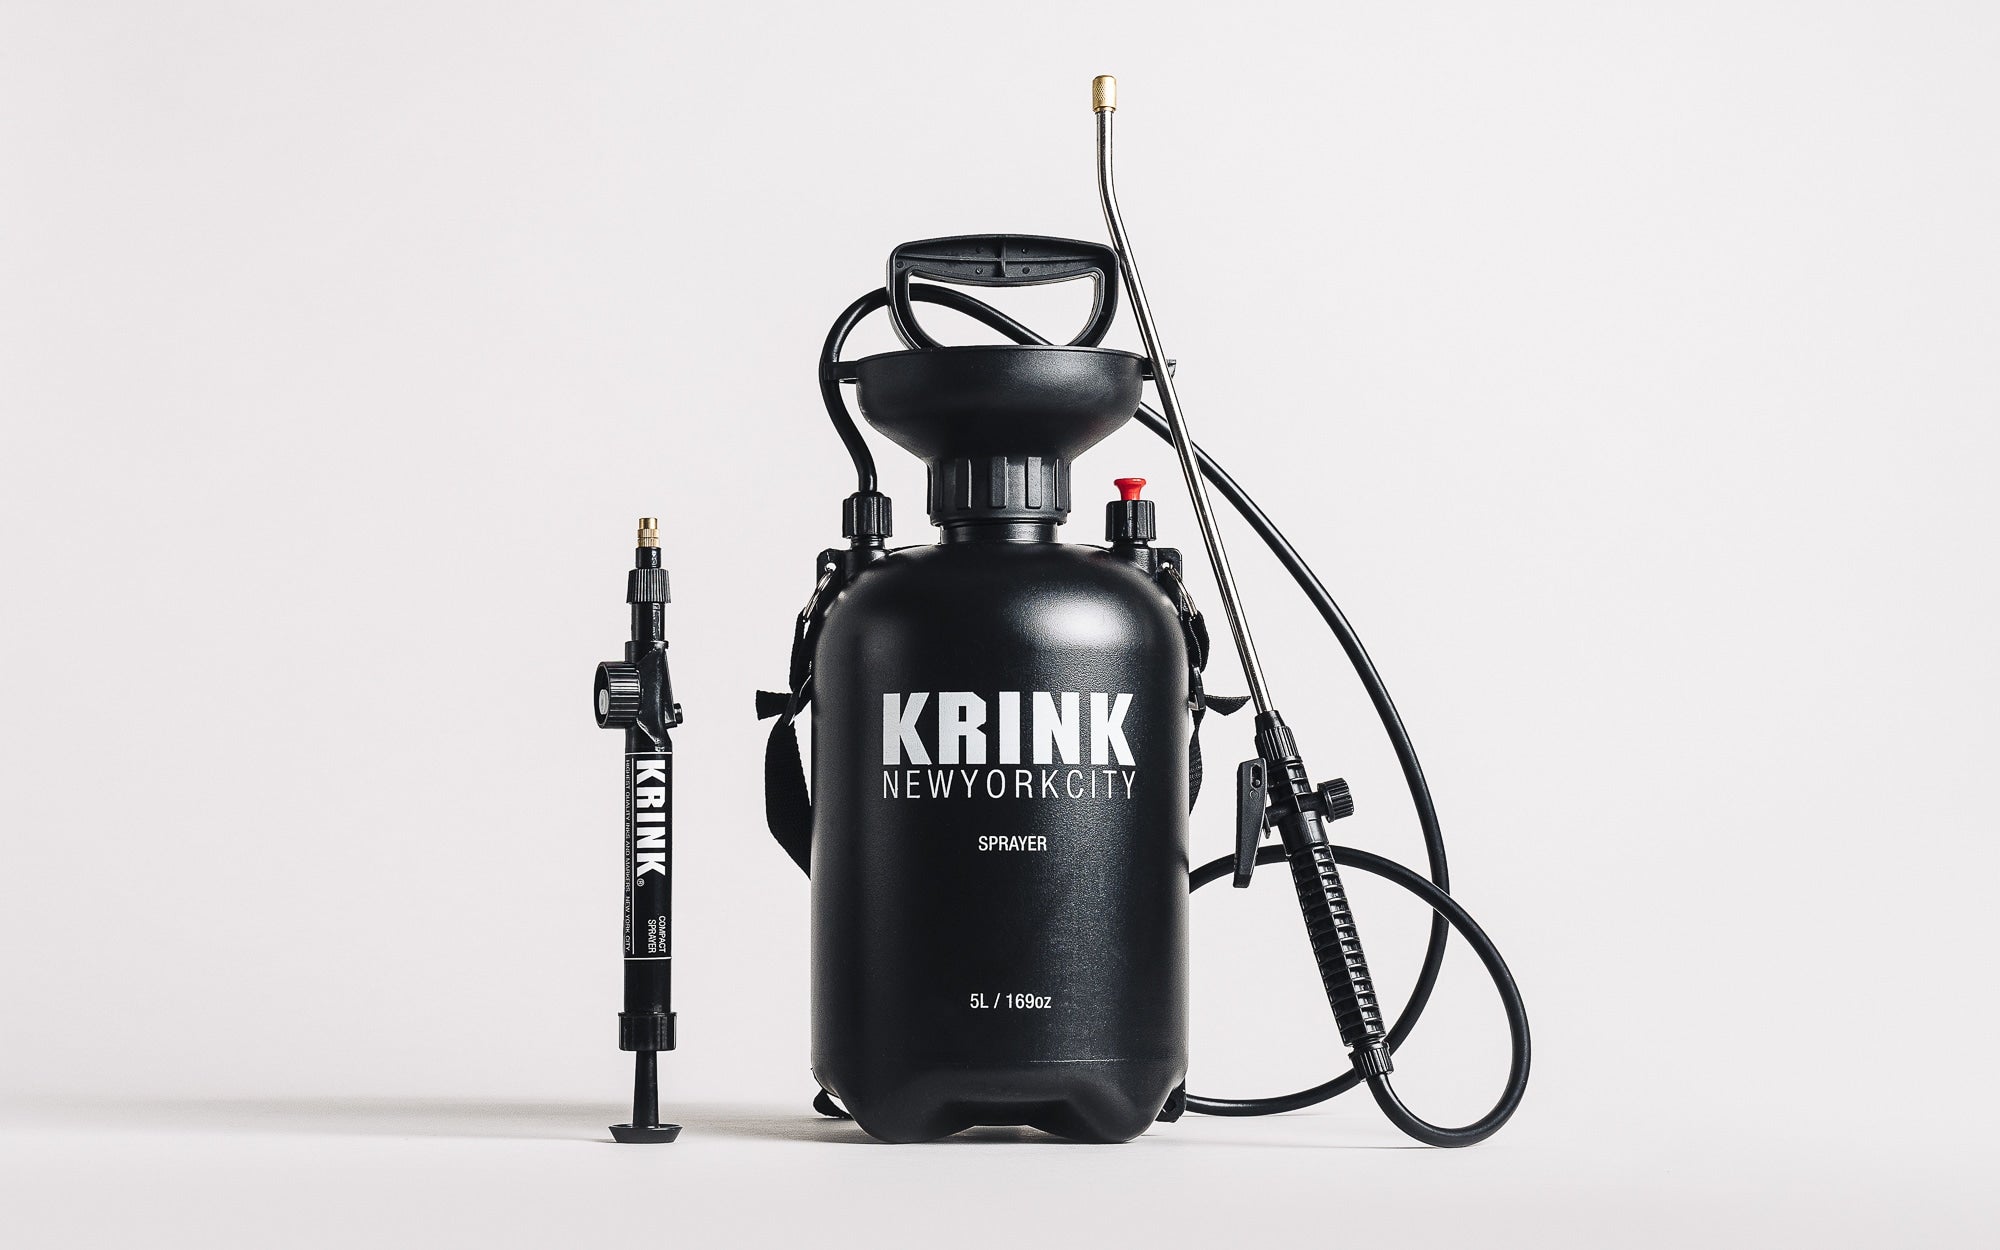  A Krink color paint equipment for Graffiti.